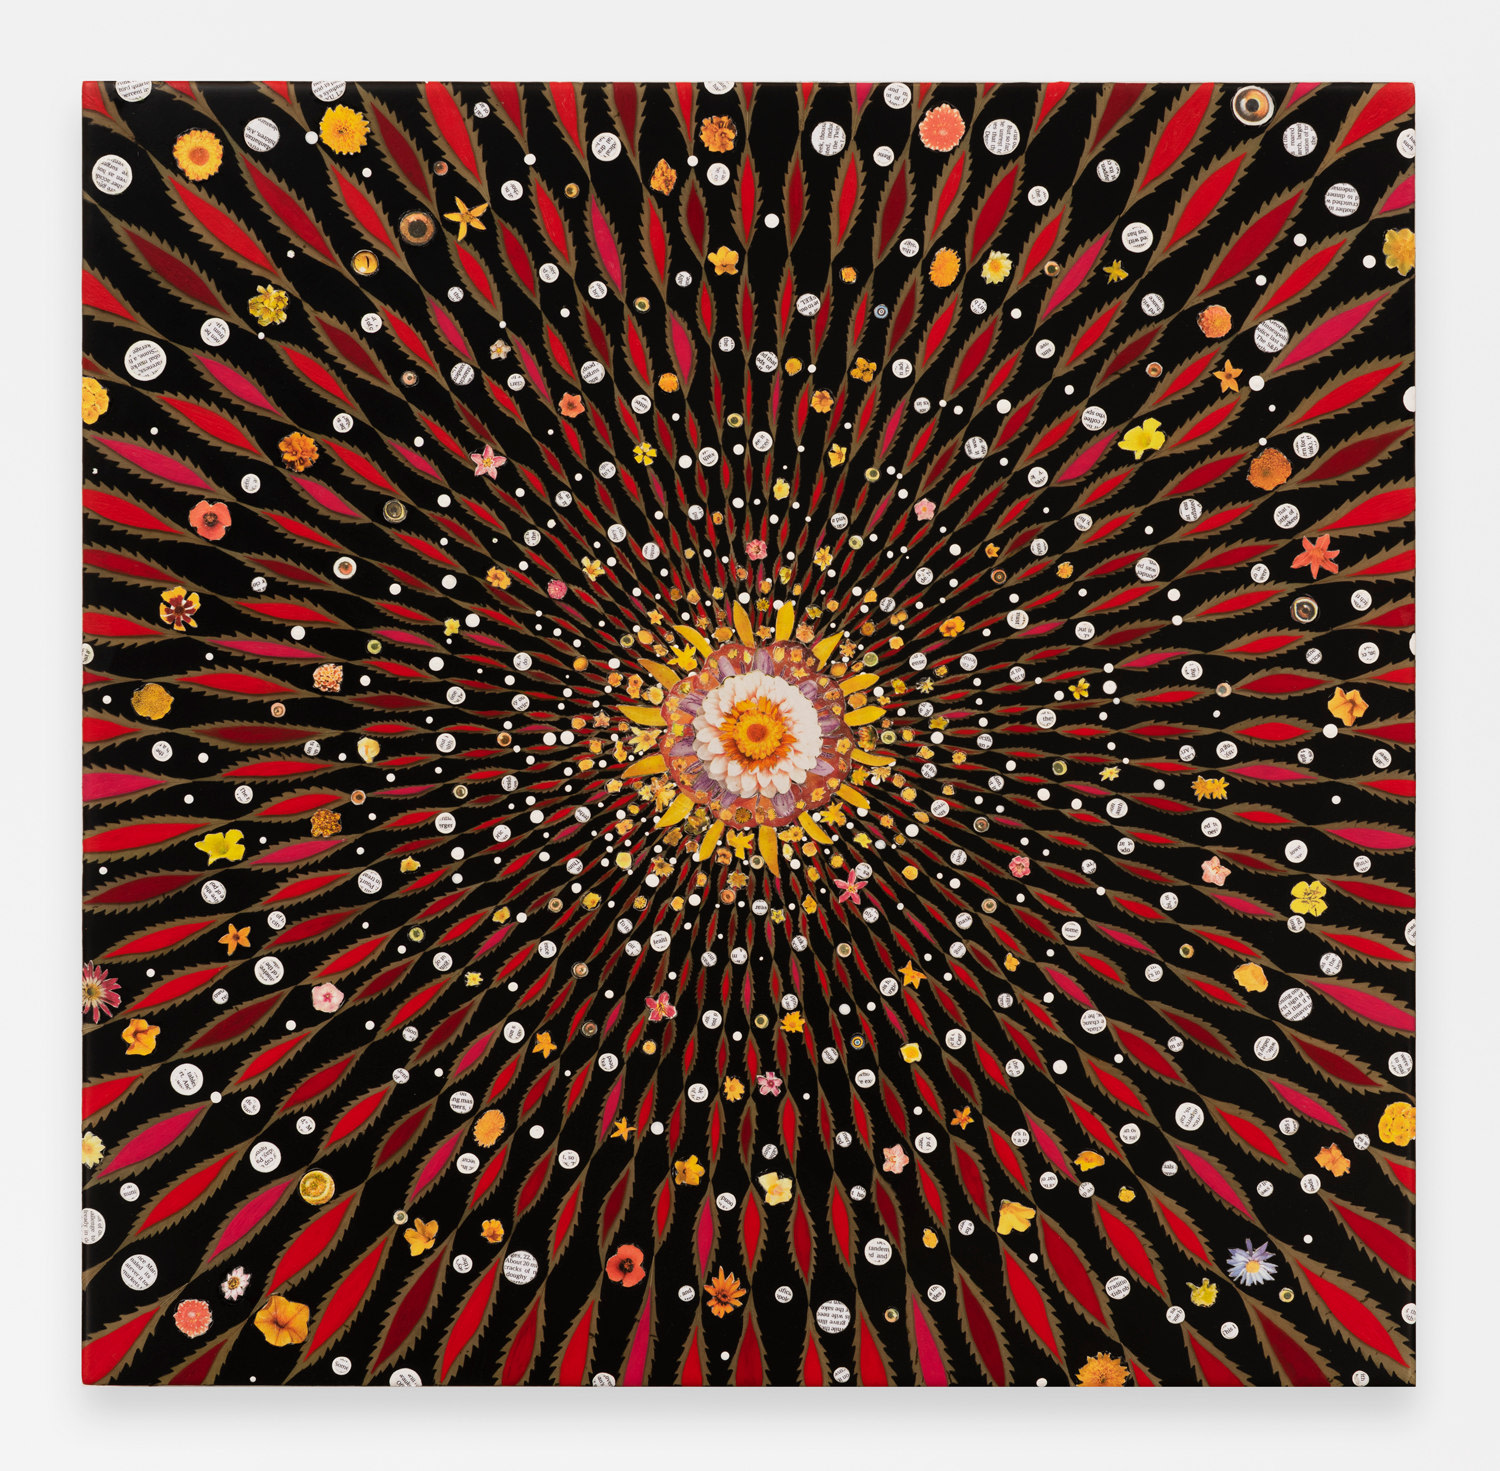 Image of FRED TOMASELLI's Pollen Spreader, 2022